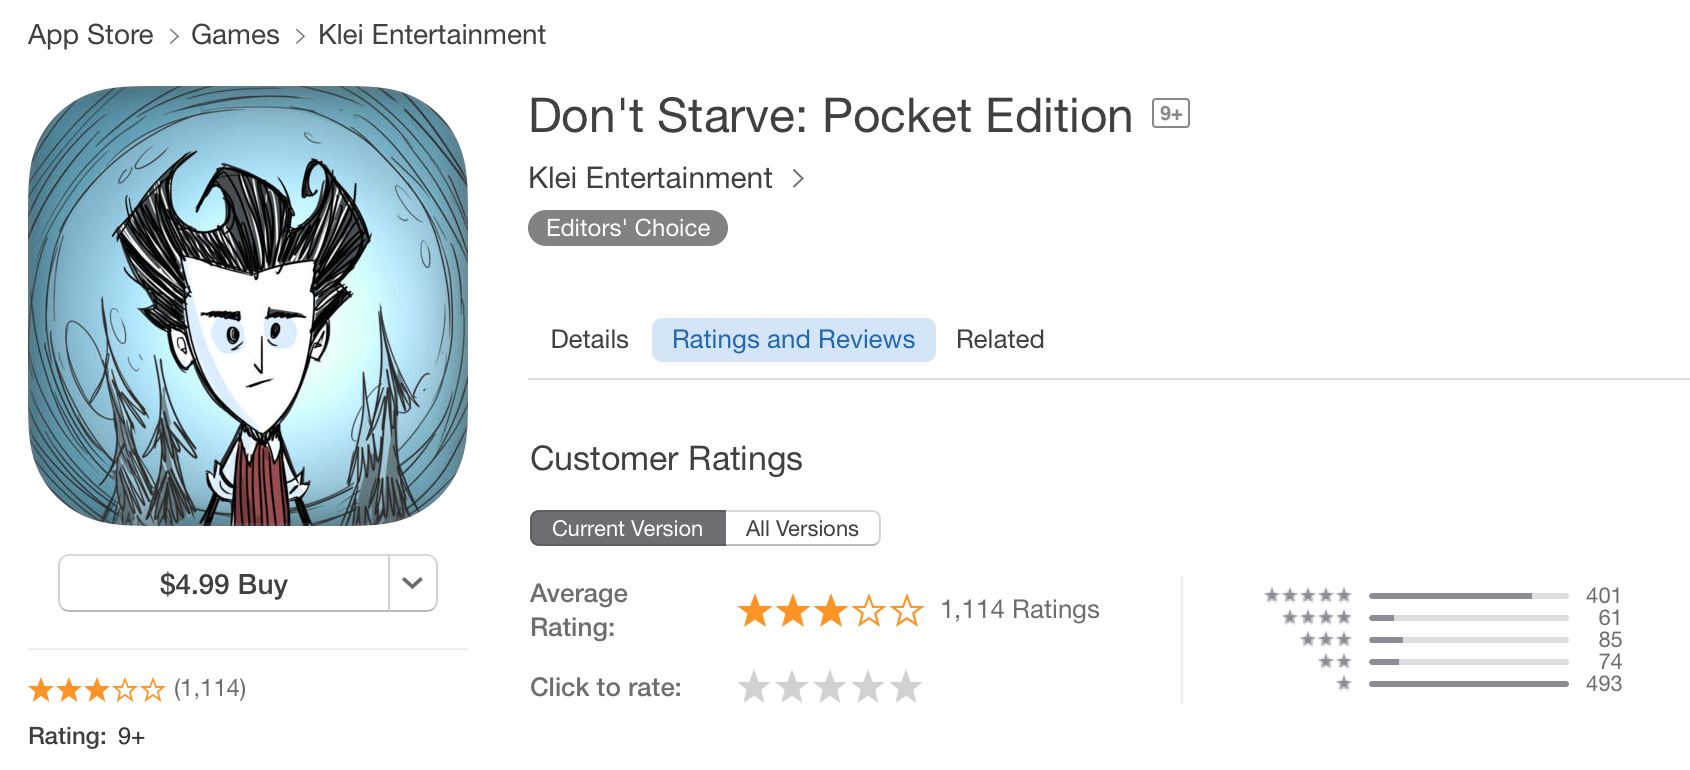 US App Store ratings for Don't Starve